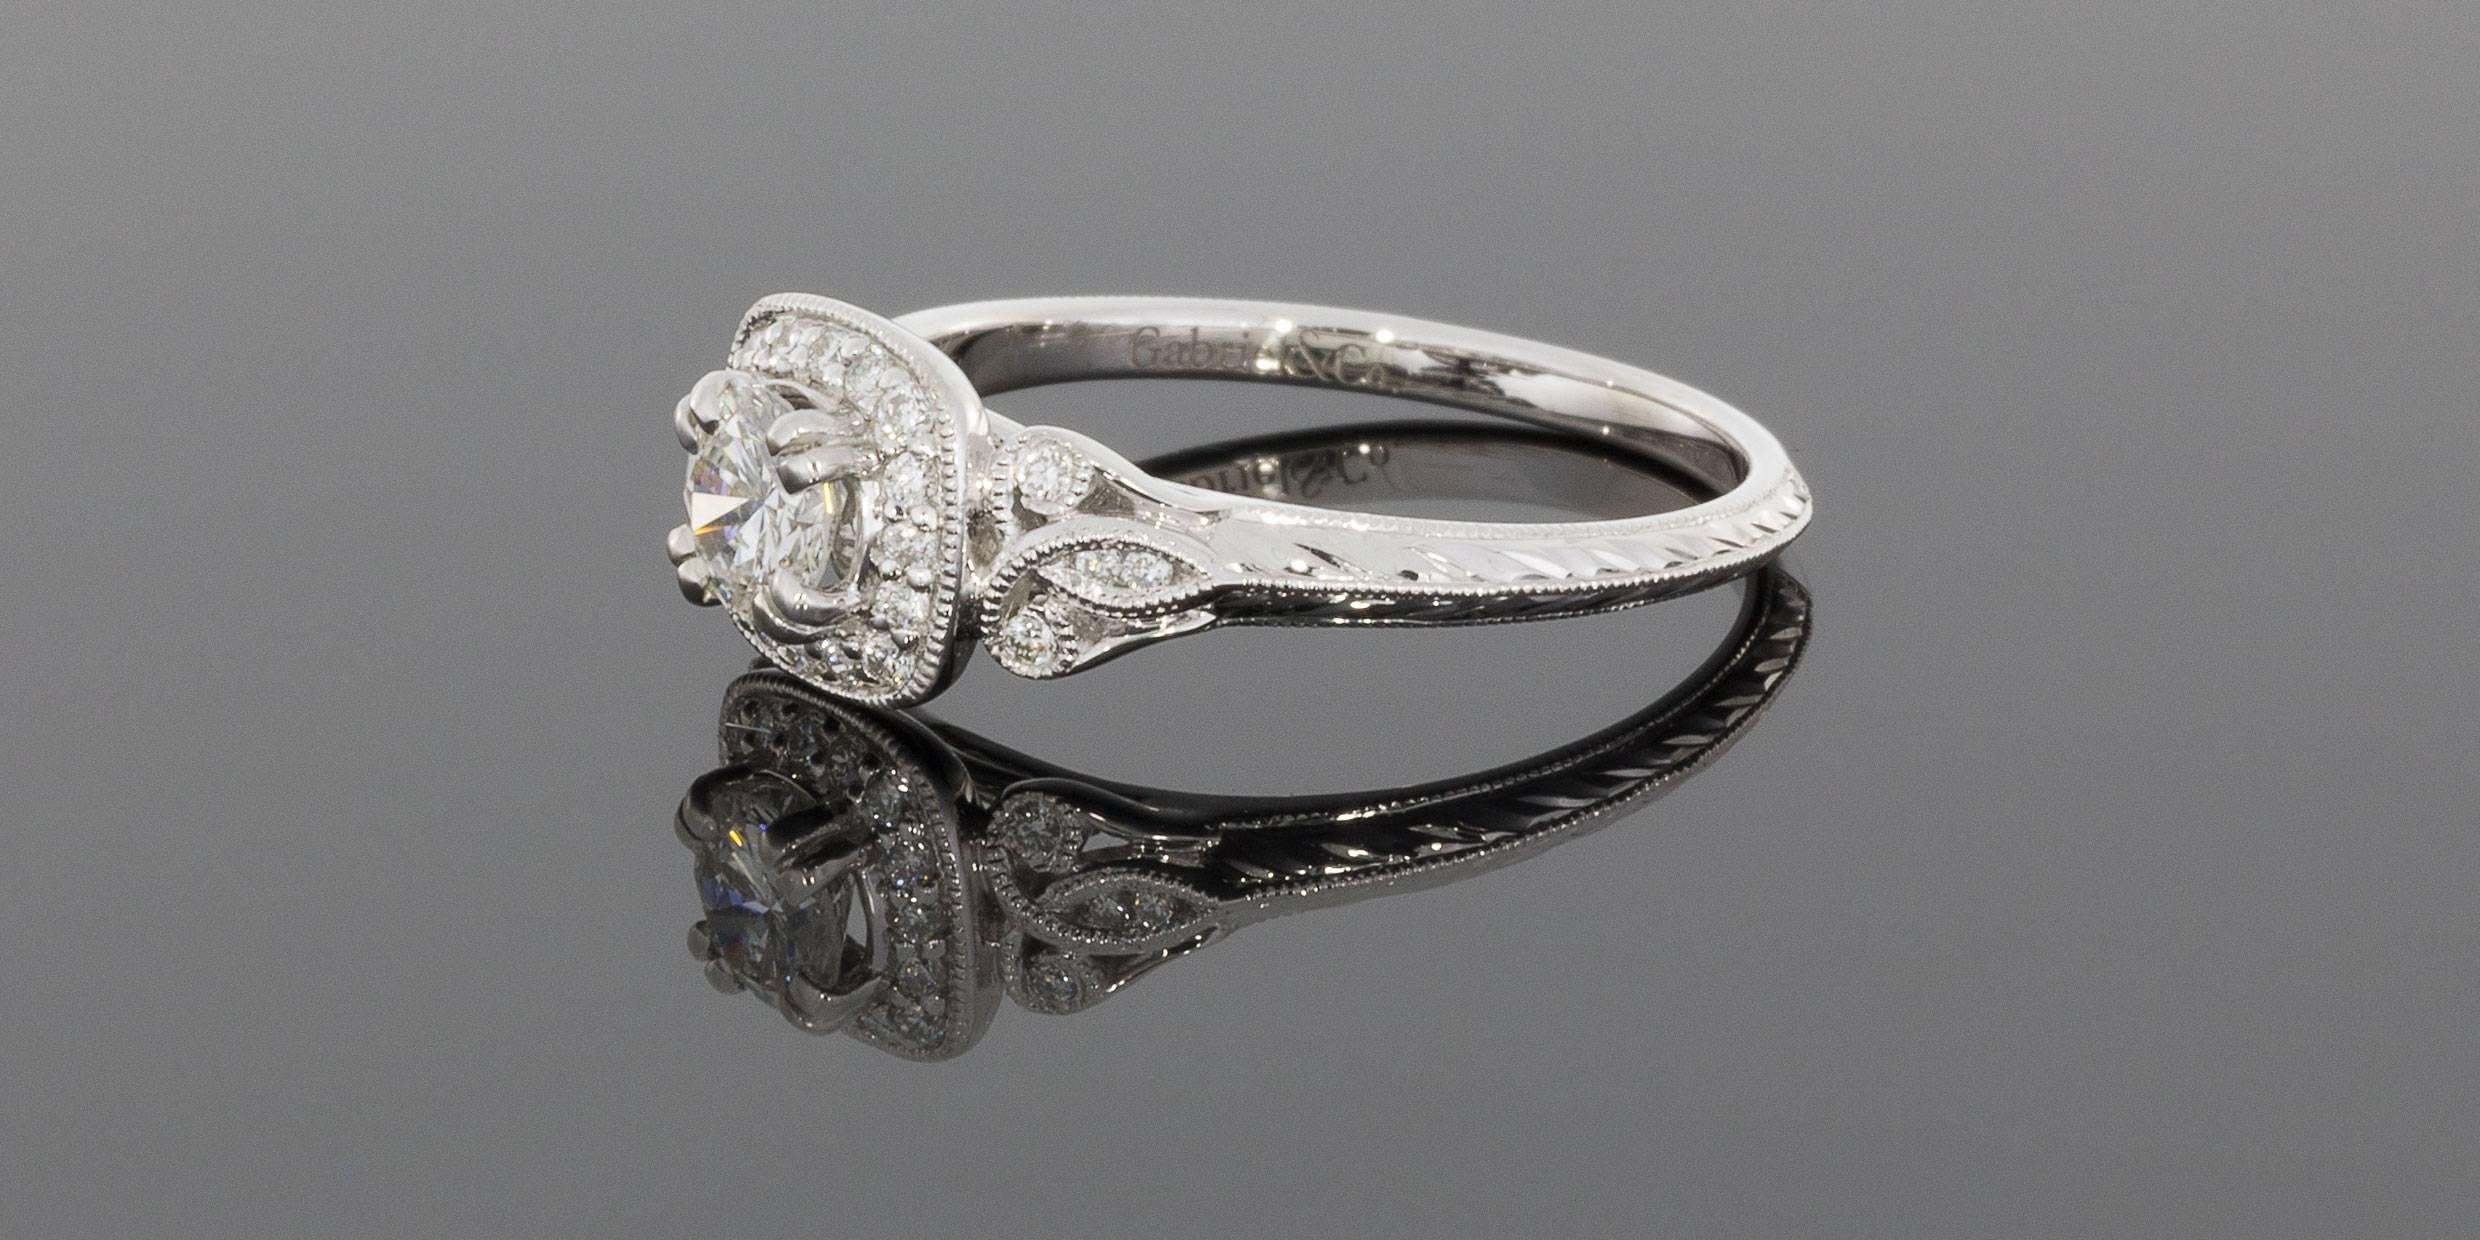 This beautiful ring features .47 carat of sparkly, round brilliant diamonds. The center diamond is a .33 carat round brilliant diamond that grades as G/SI2 in quality. This scintillating diamond is prong set in a cushion shaped, diamond halo with